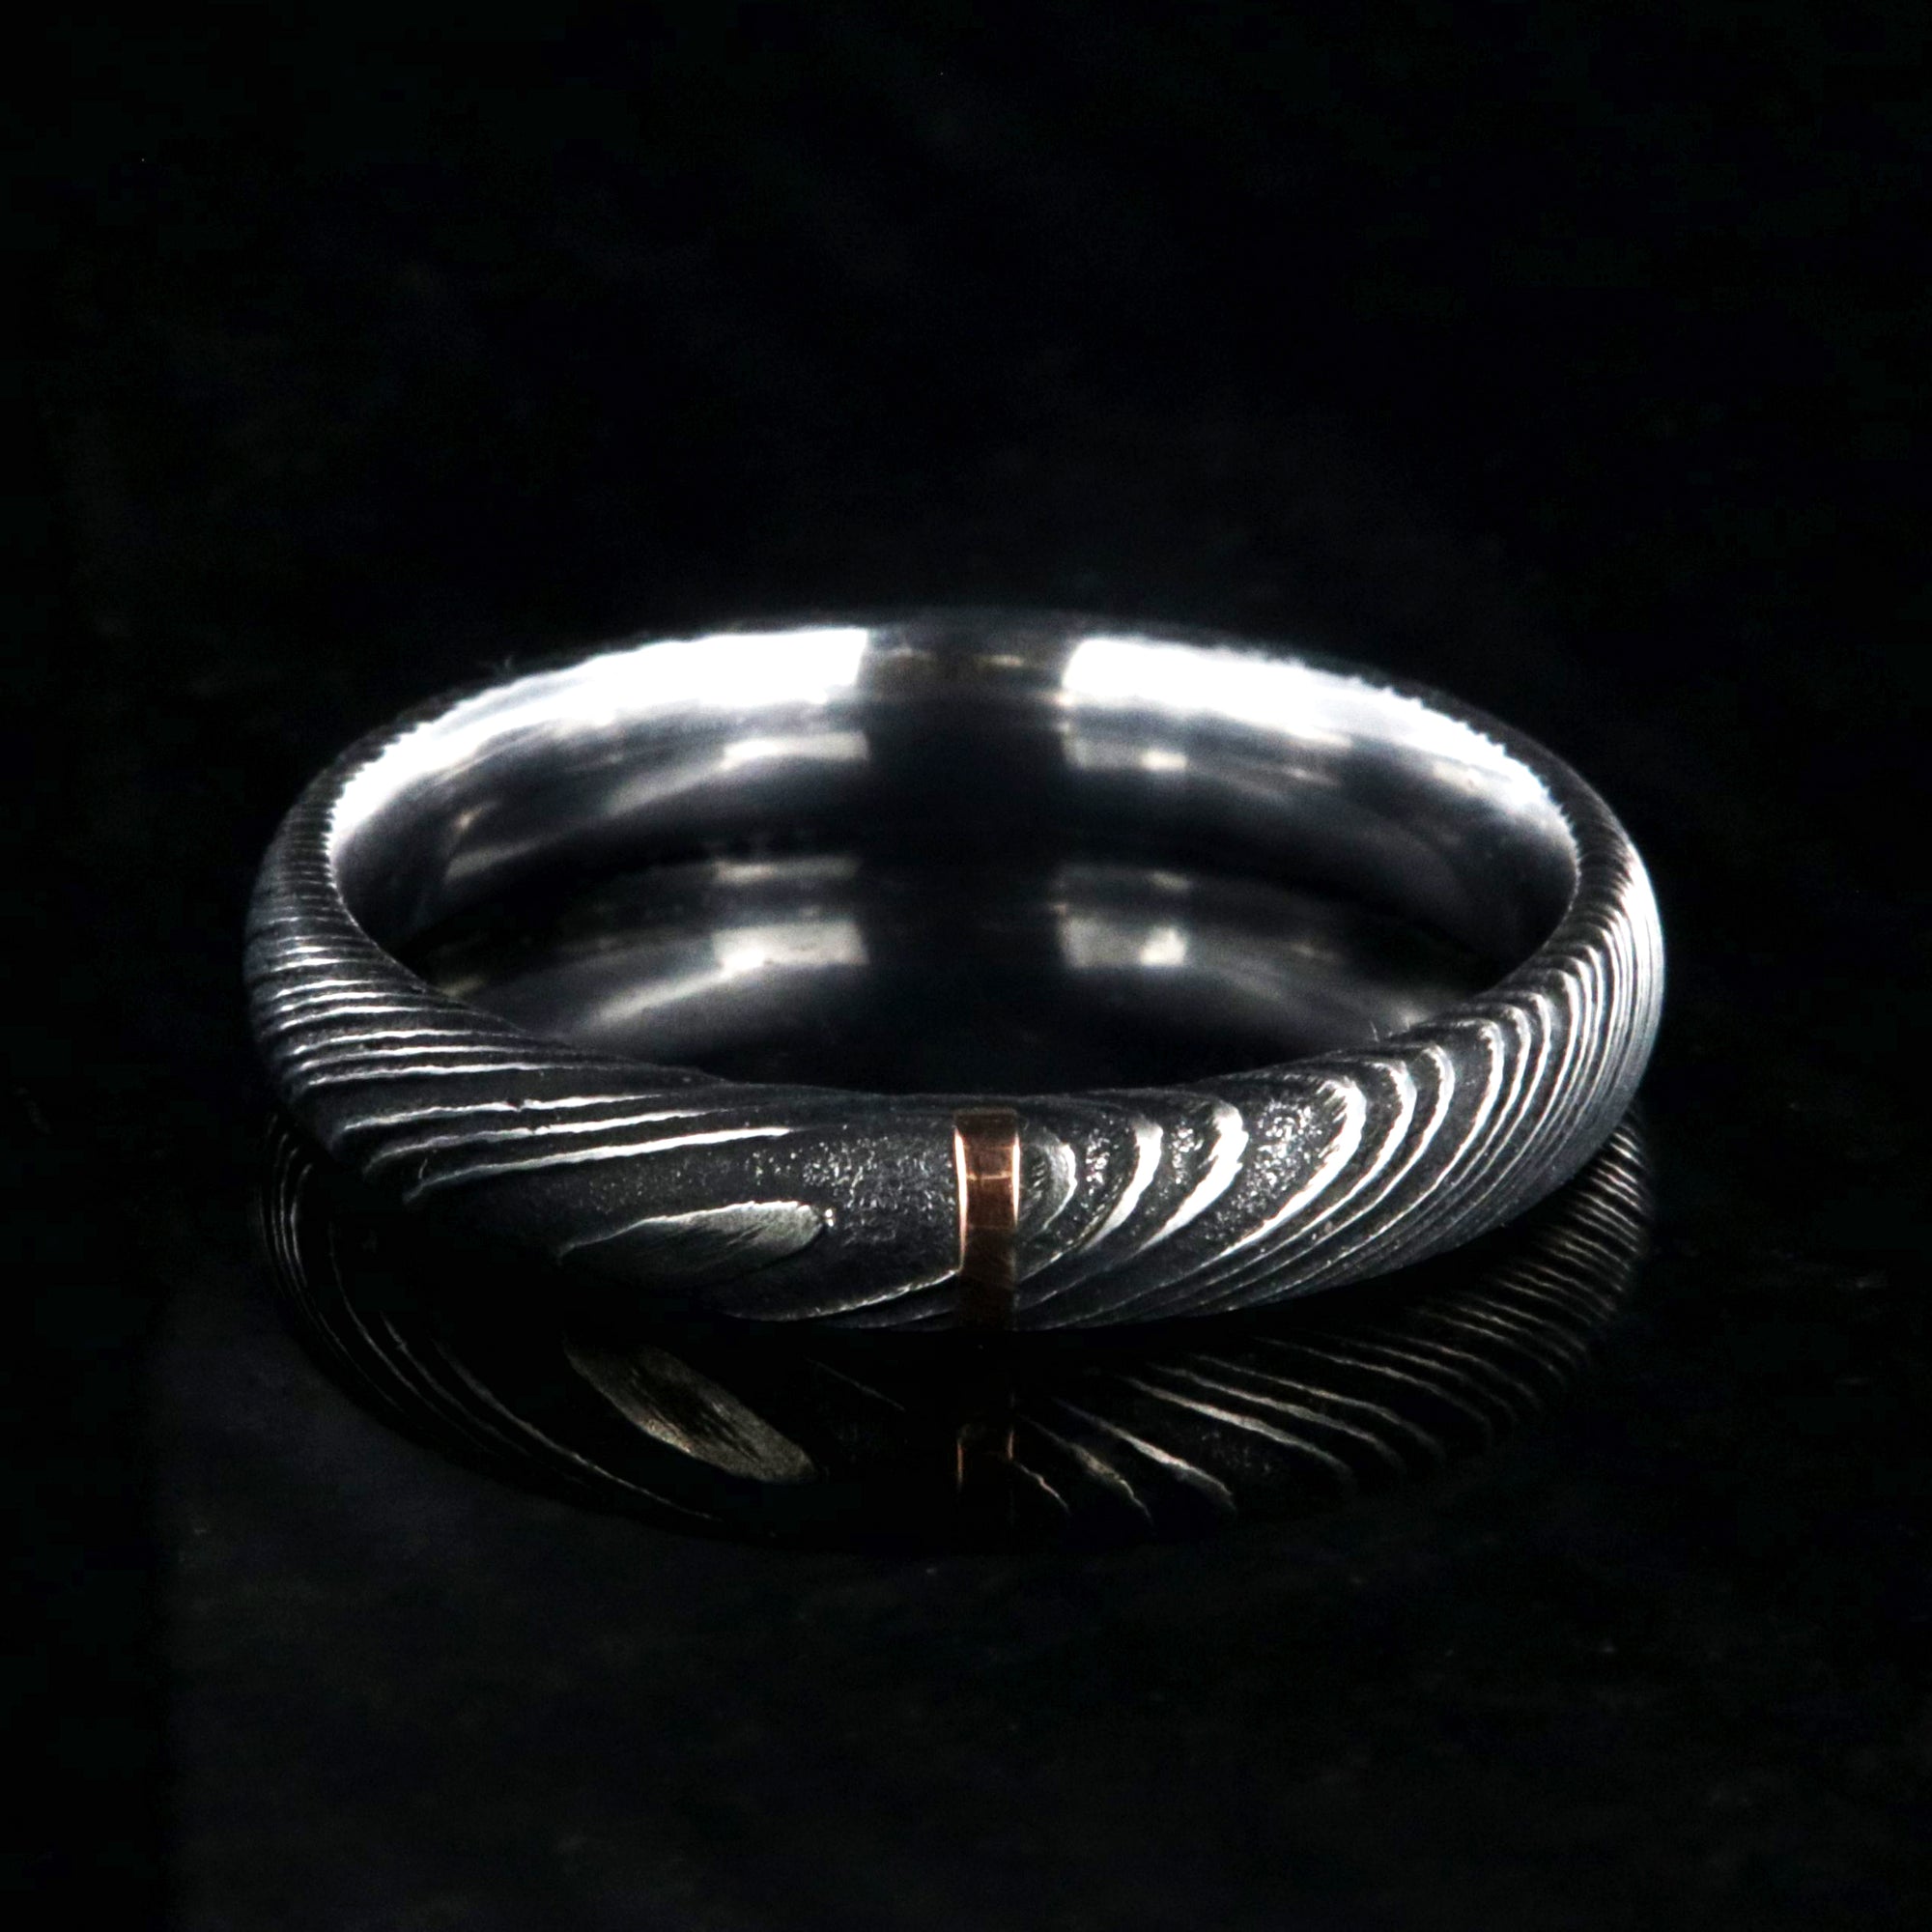 4mm wide black Damascus steel wedding band with a single vertical rose gold inlay